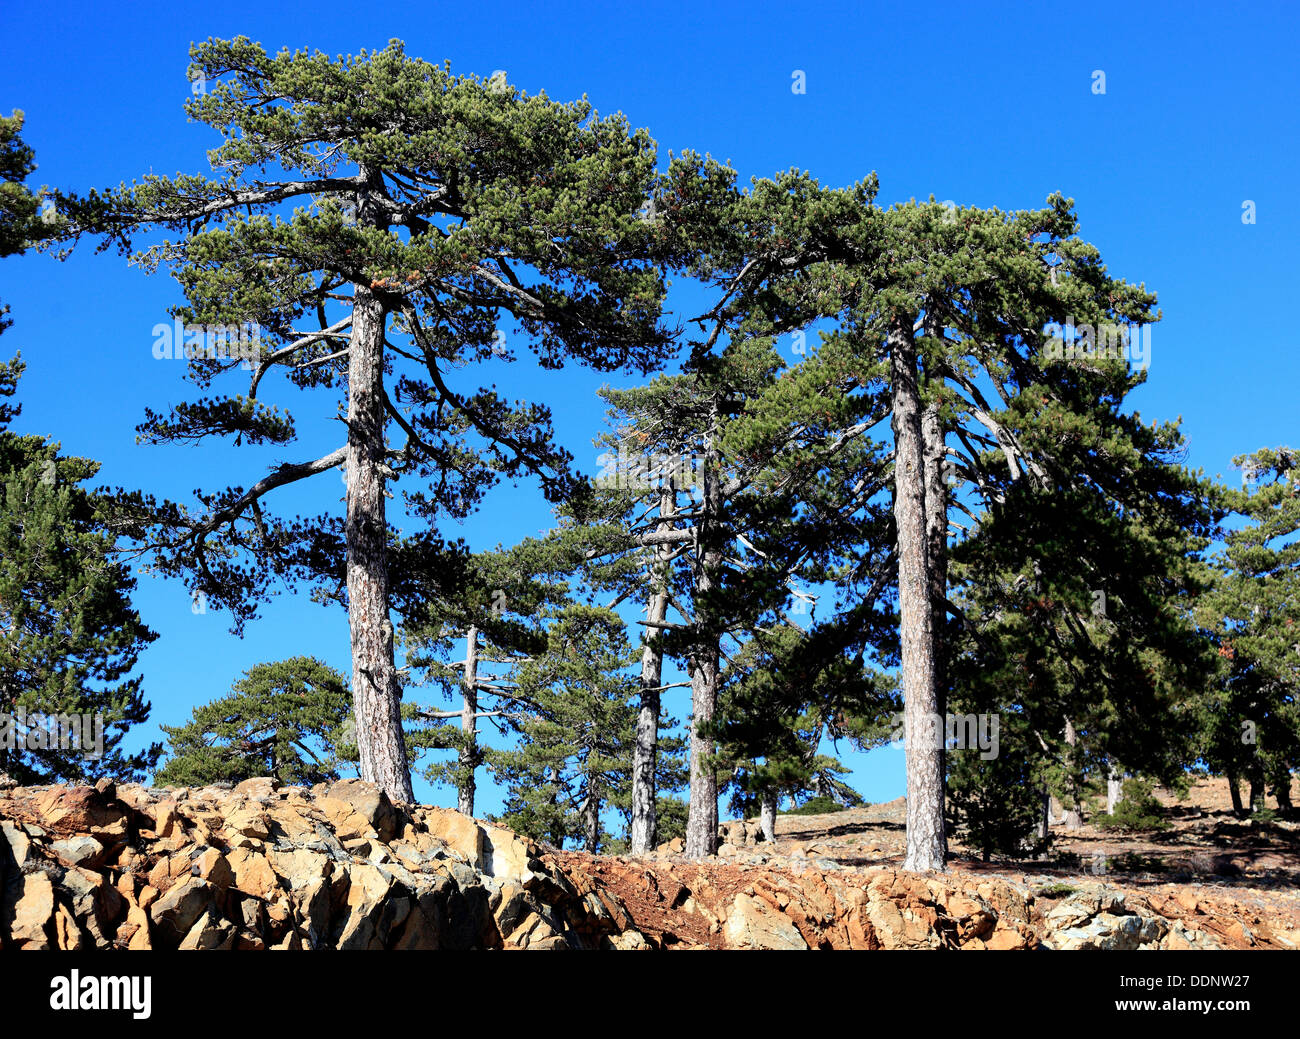 Cyprus, trees, pine trees in Troodos Mountains Stock Photo